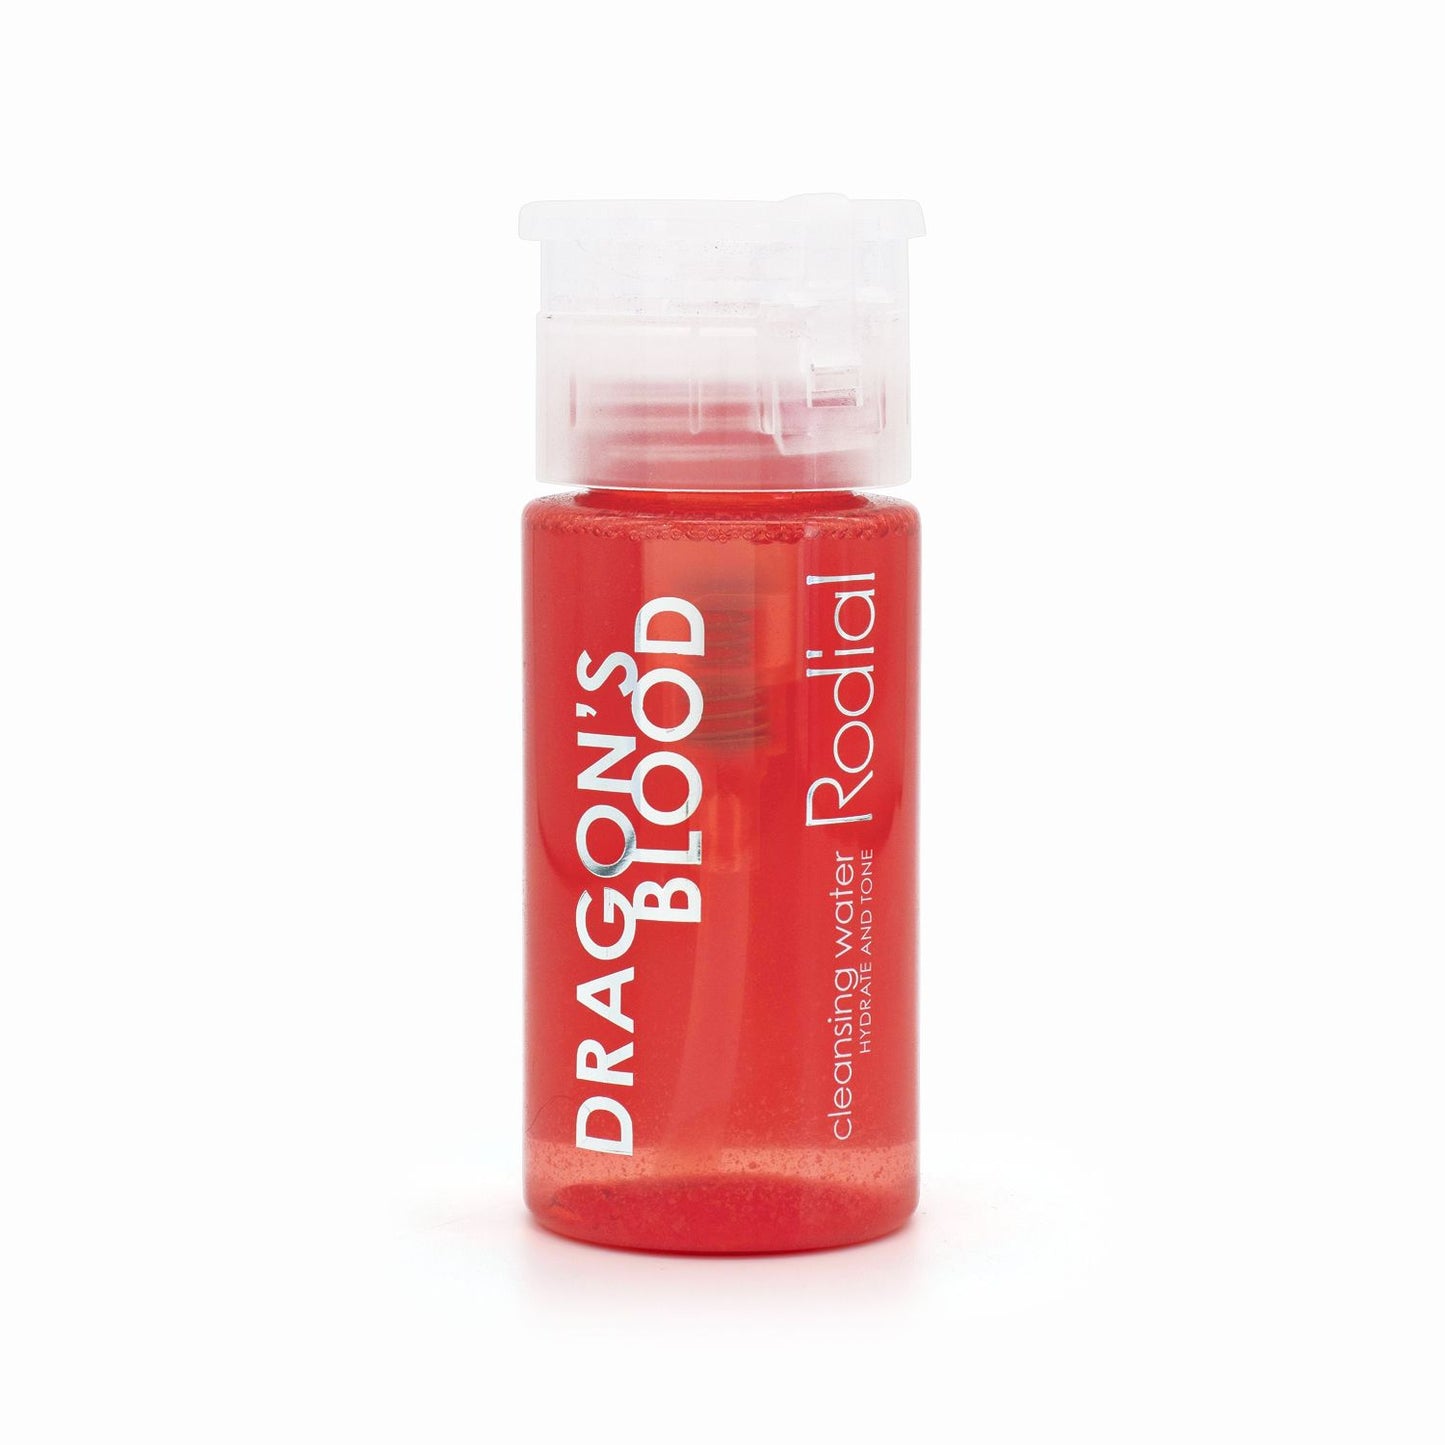 Rodial Dragon's Blood Cleansing Water 100ml - Imperfect Container